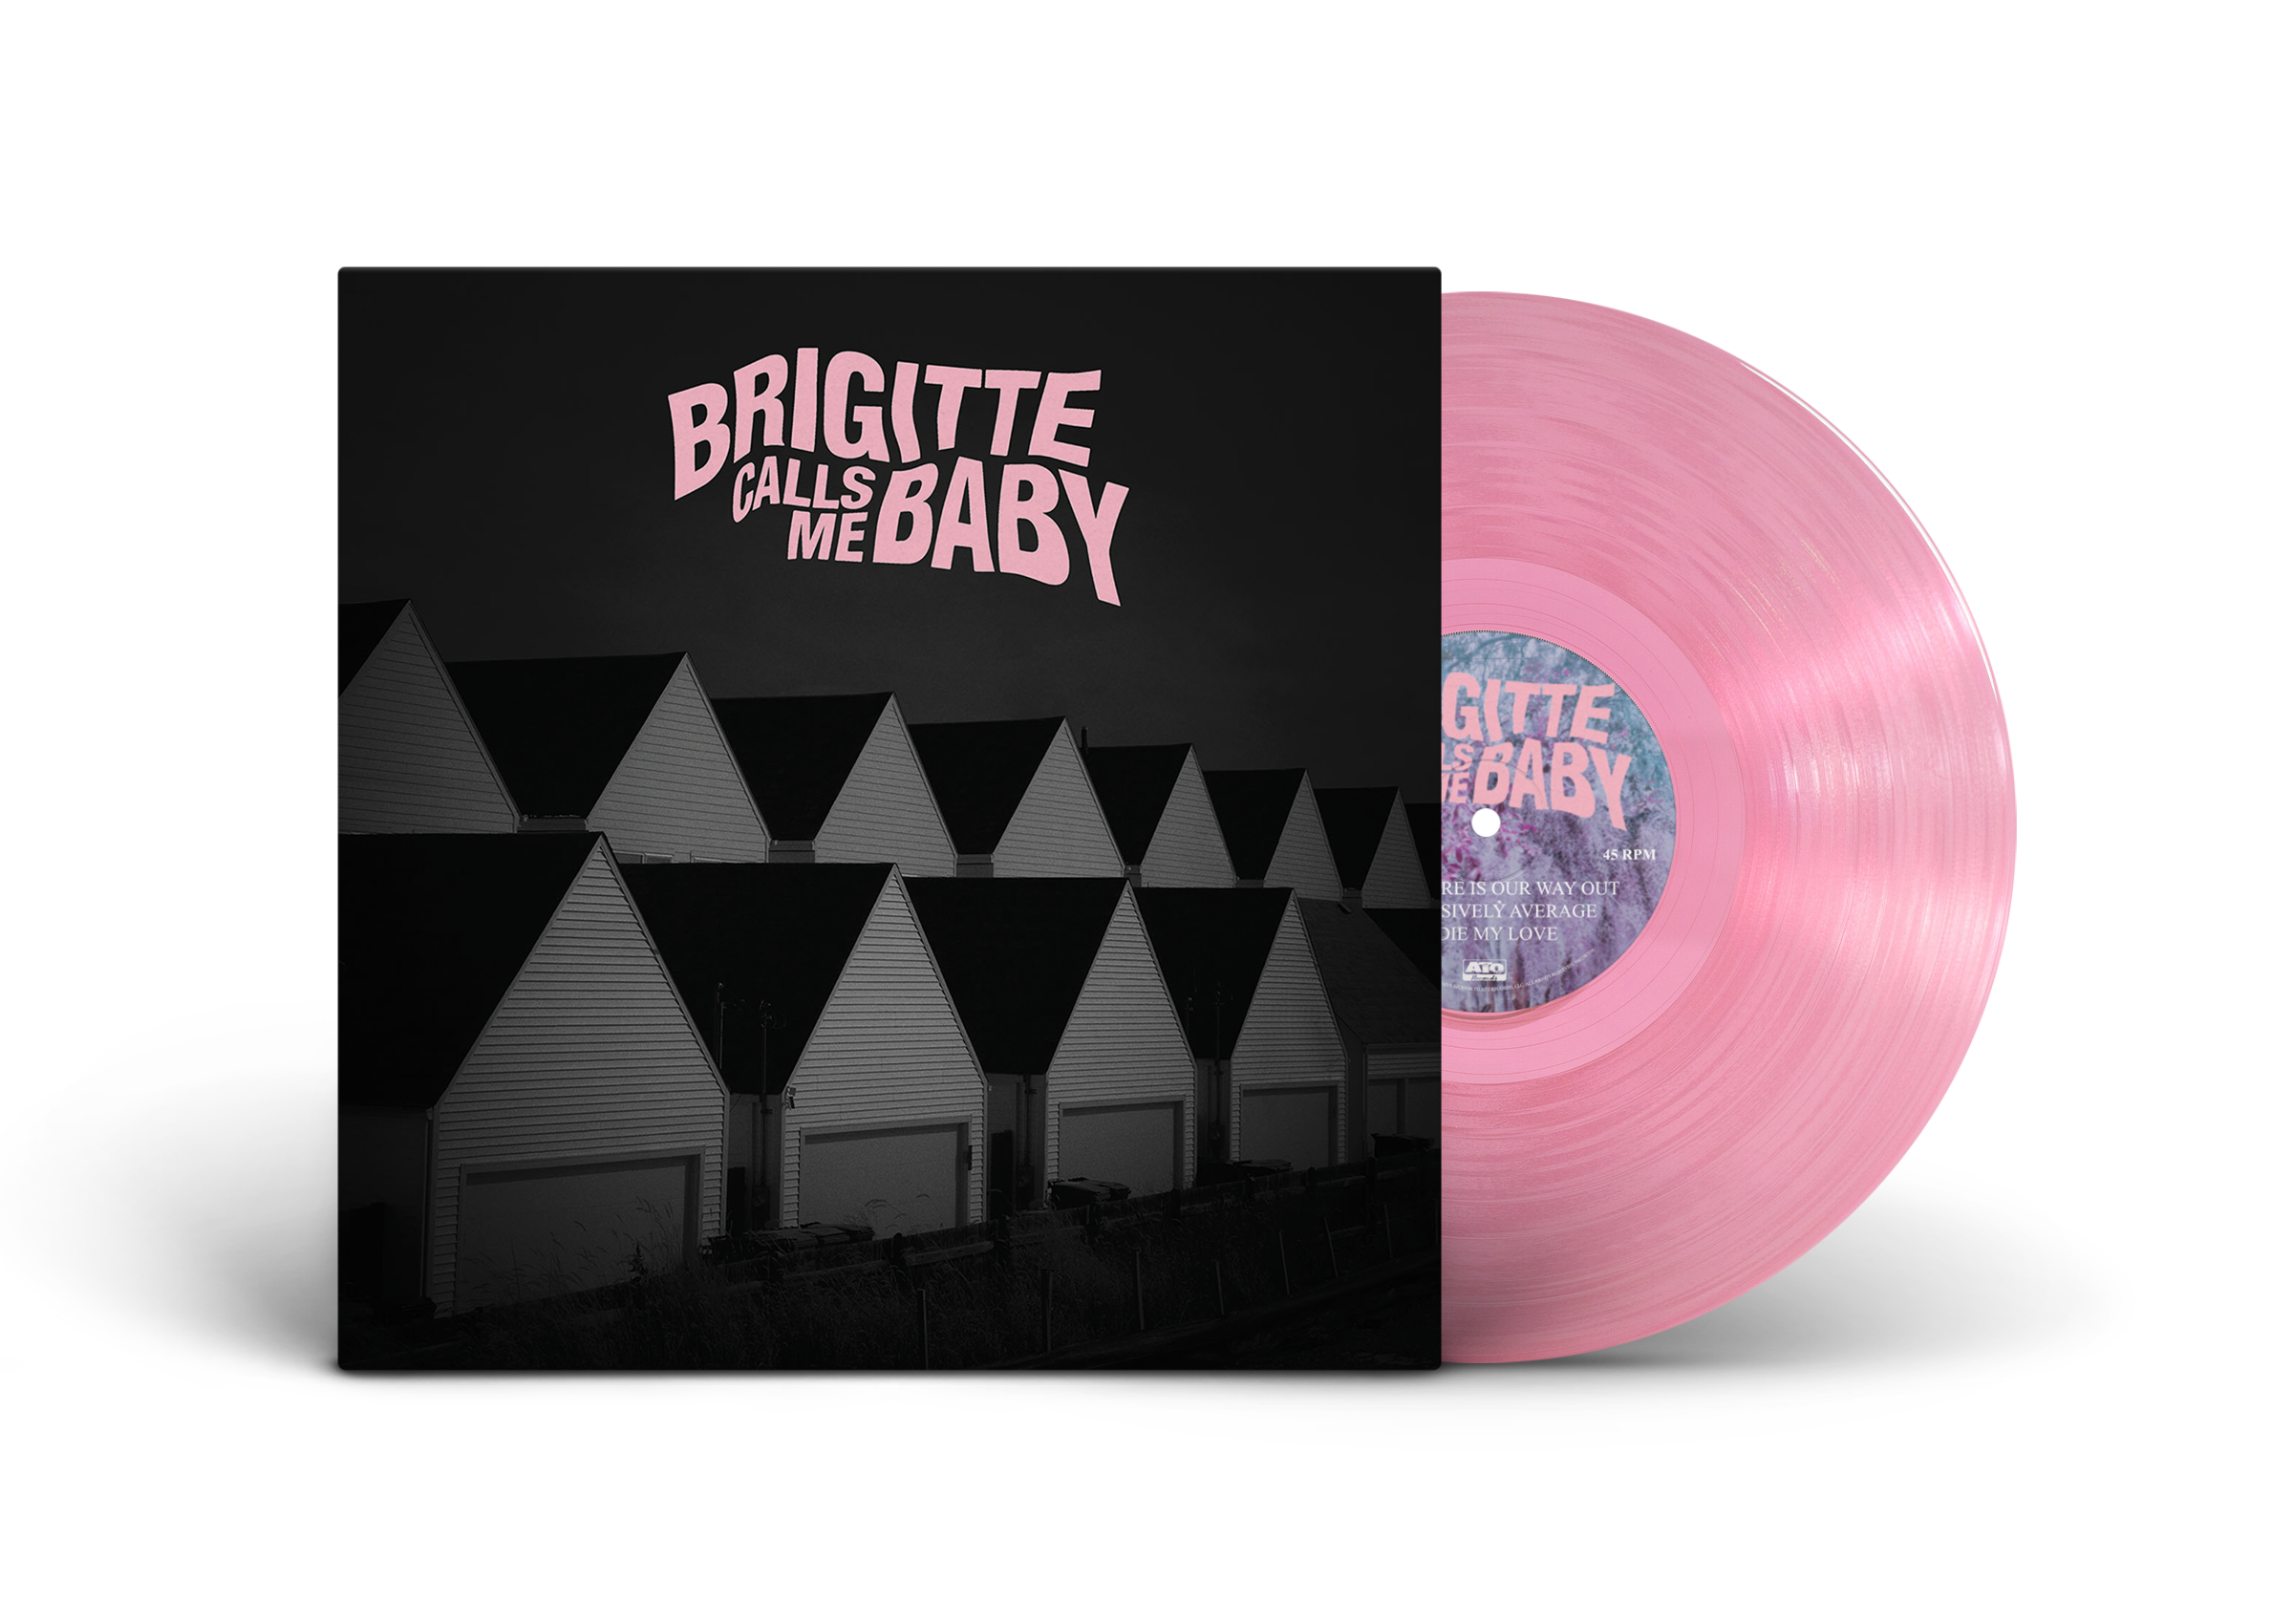 Brigitte Calls Me Baby - This House is Made of Corners: Limited Pink Vinyl 12" EP